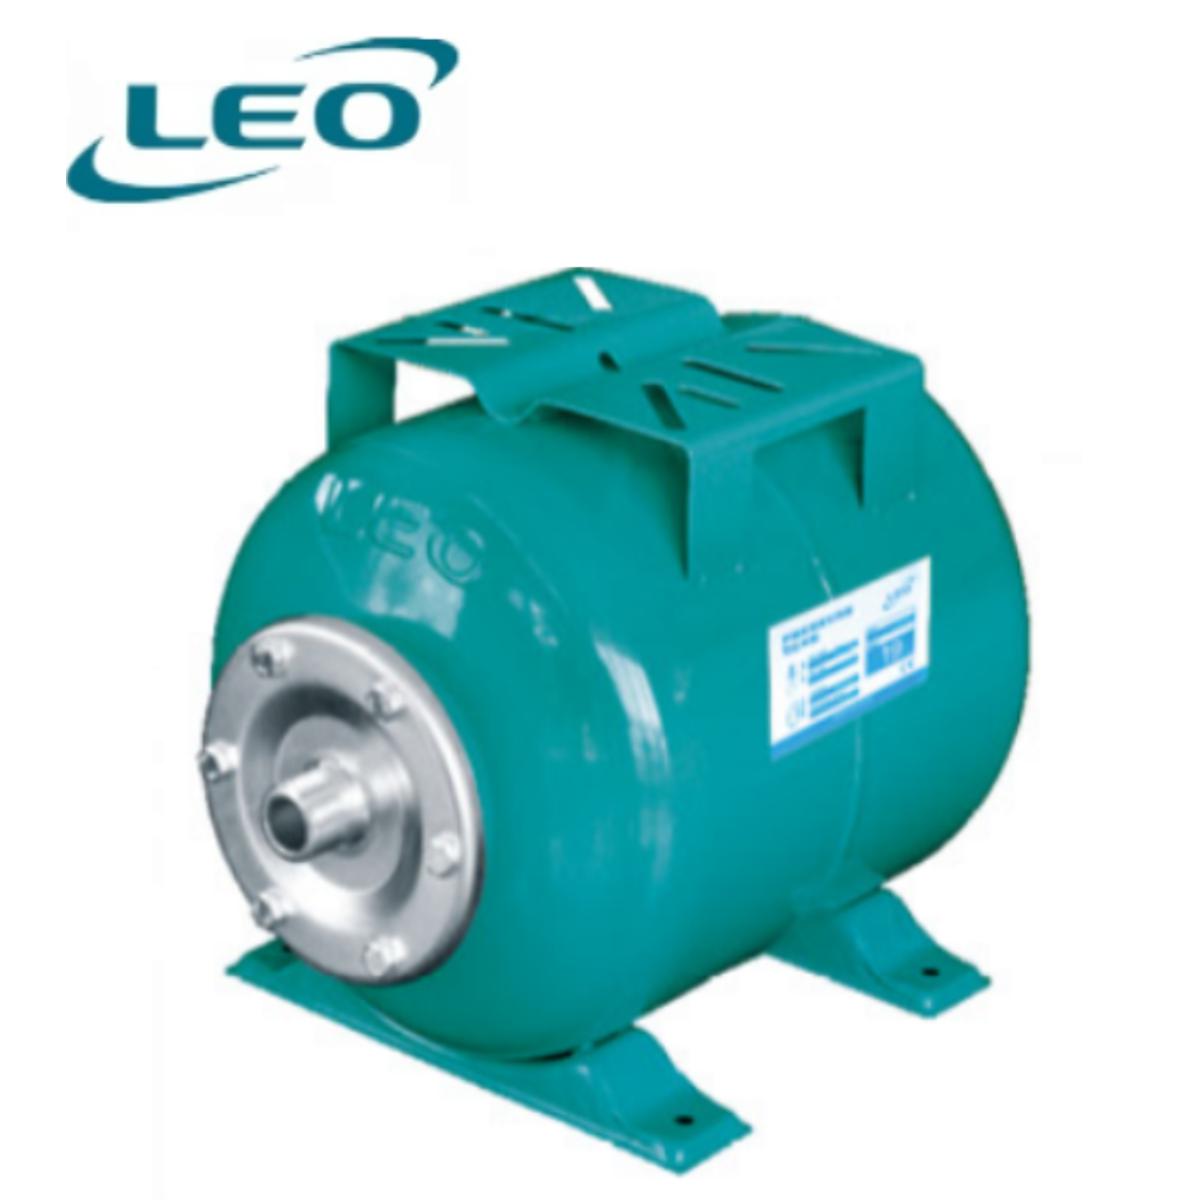 LEO - 60CTTI -  60 LTR PRESSURE TANK HORIZONTAL FOR Water Pump ( TANK ONLY )